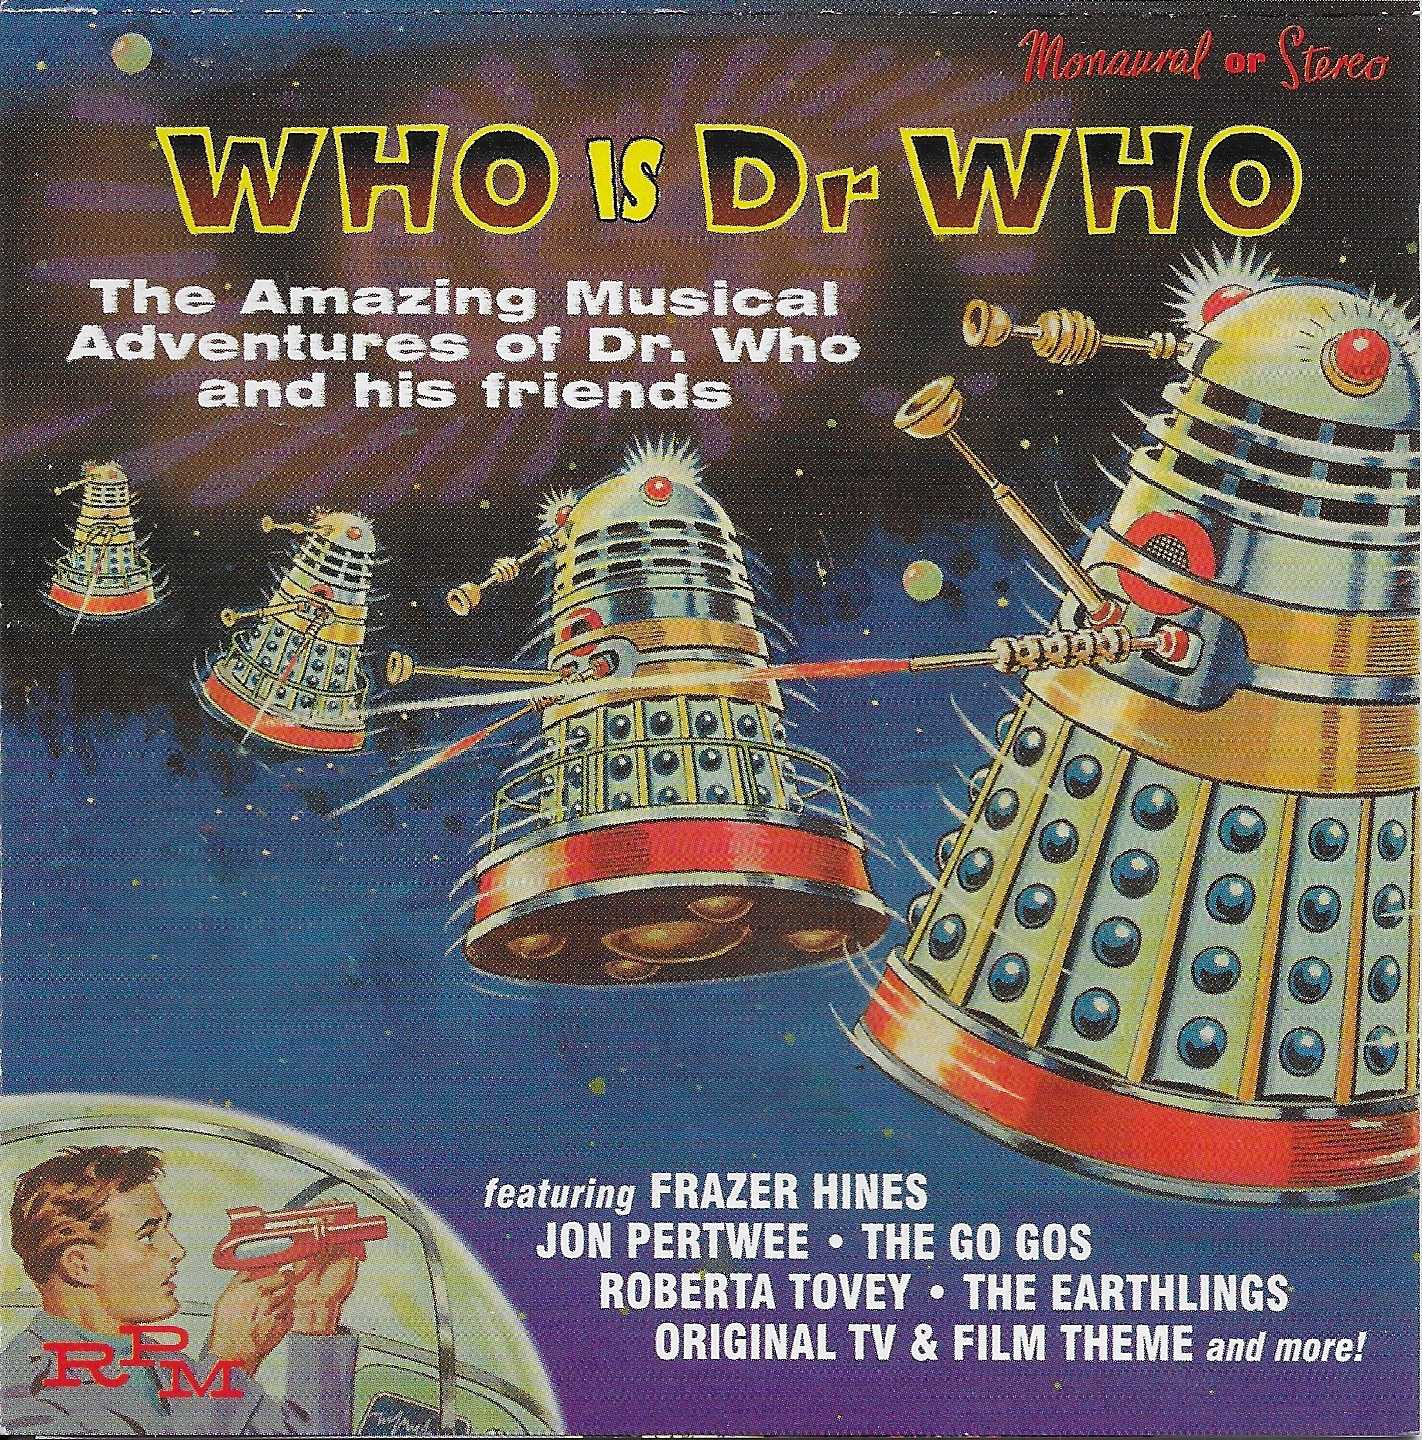 Picture of RPM 200 Who is Doctor Who \? by artist Various from the BBC records and Tapes library